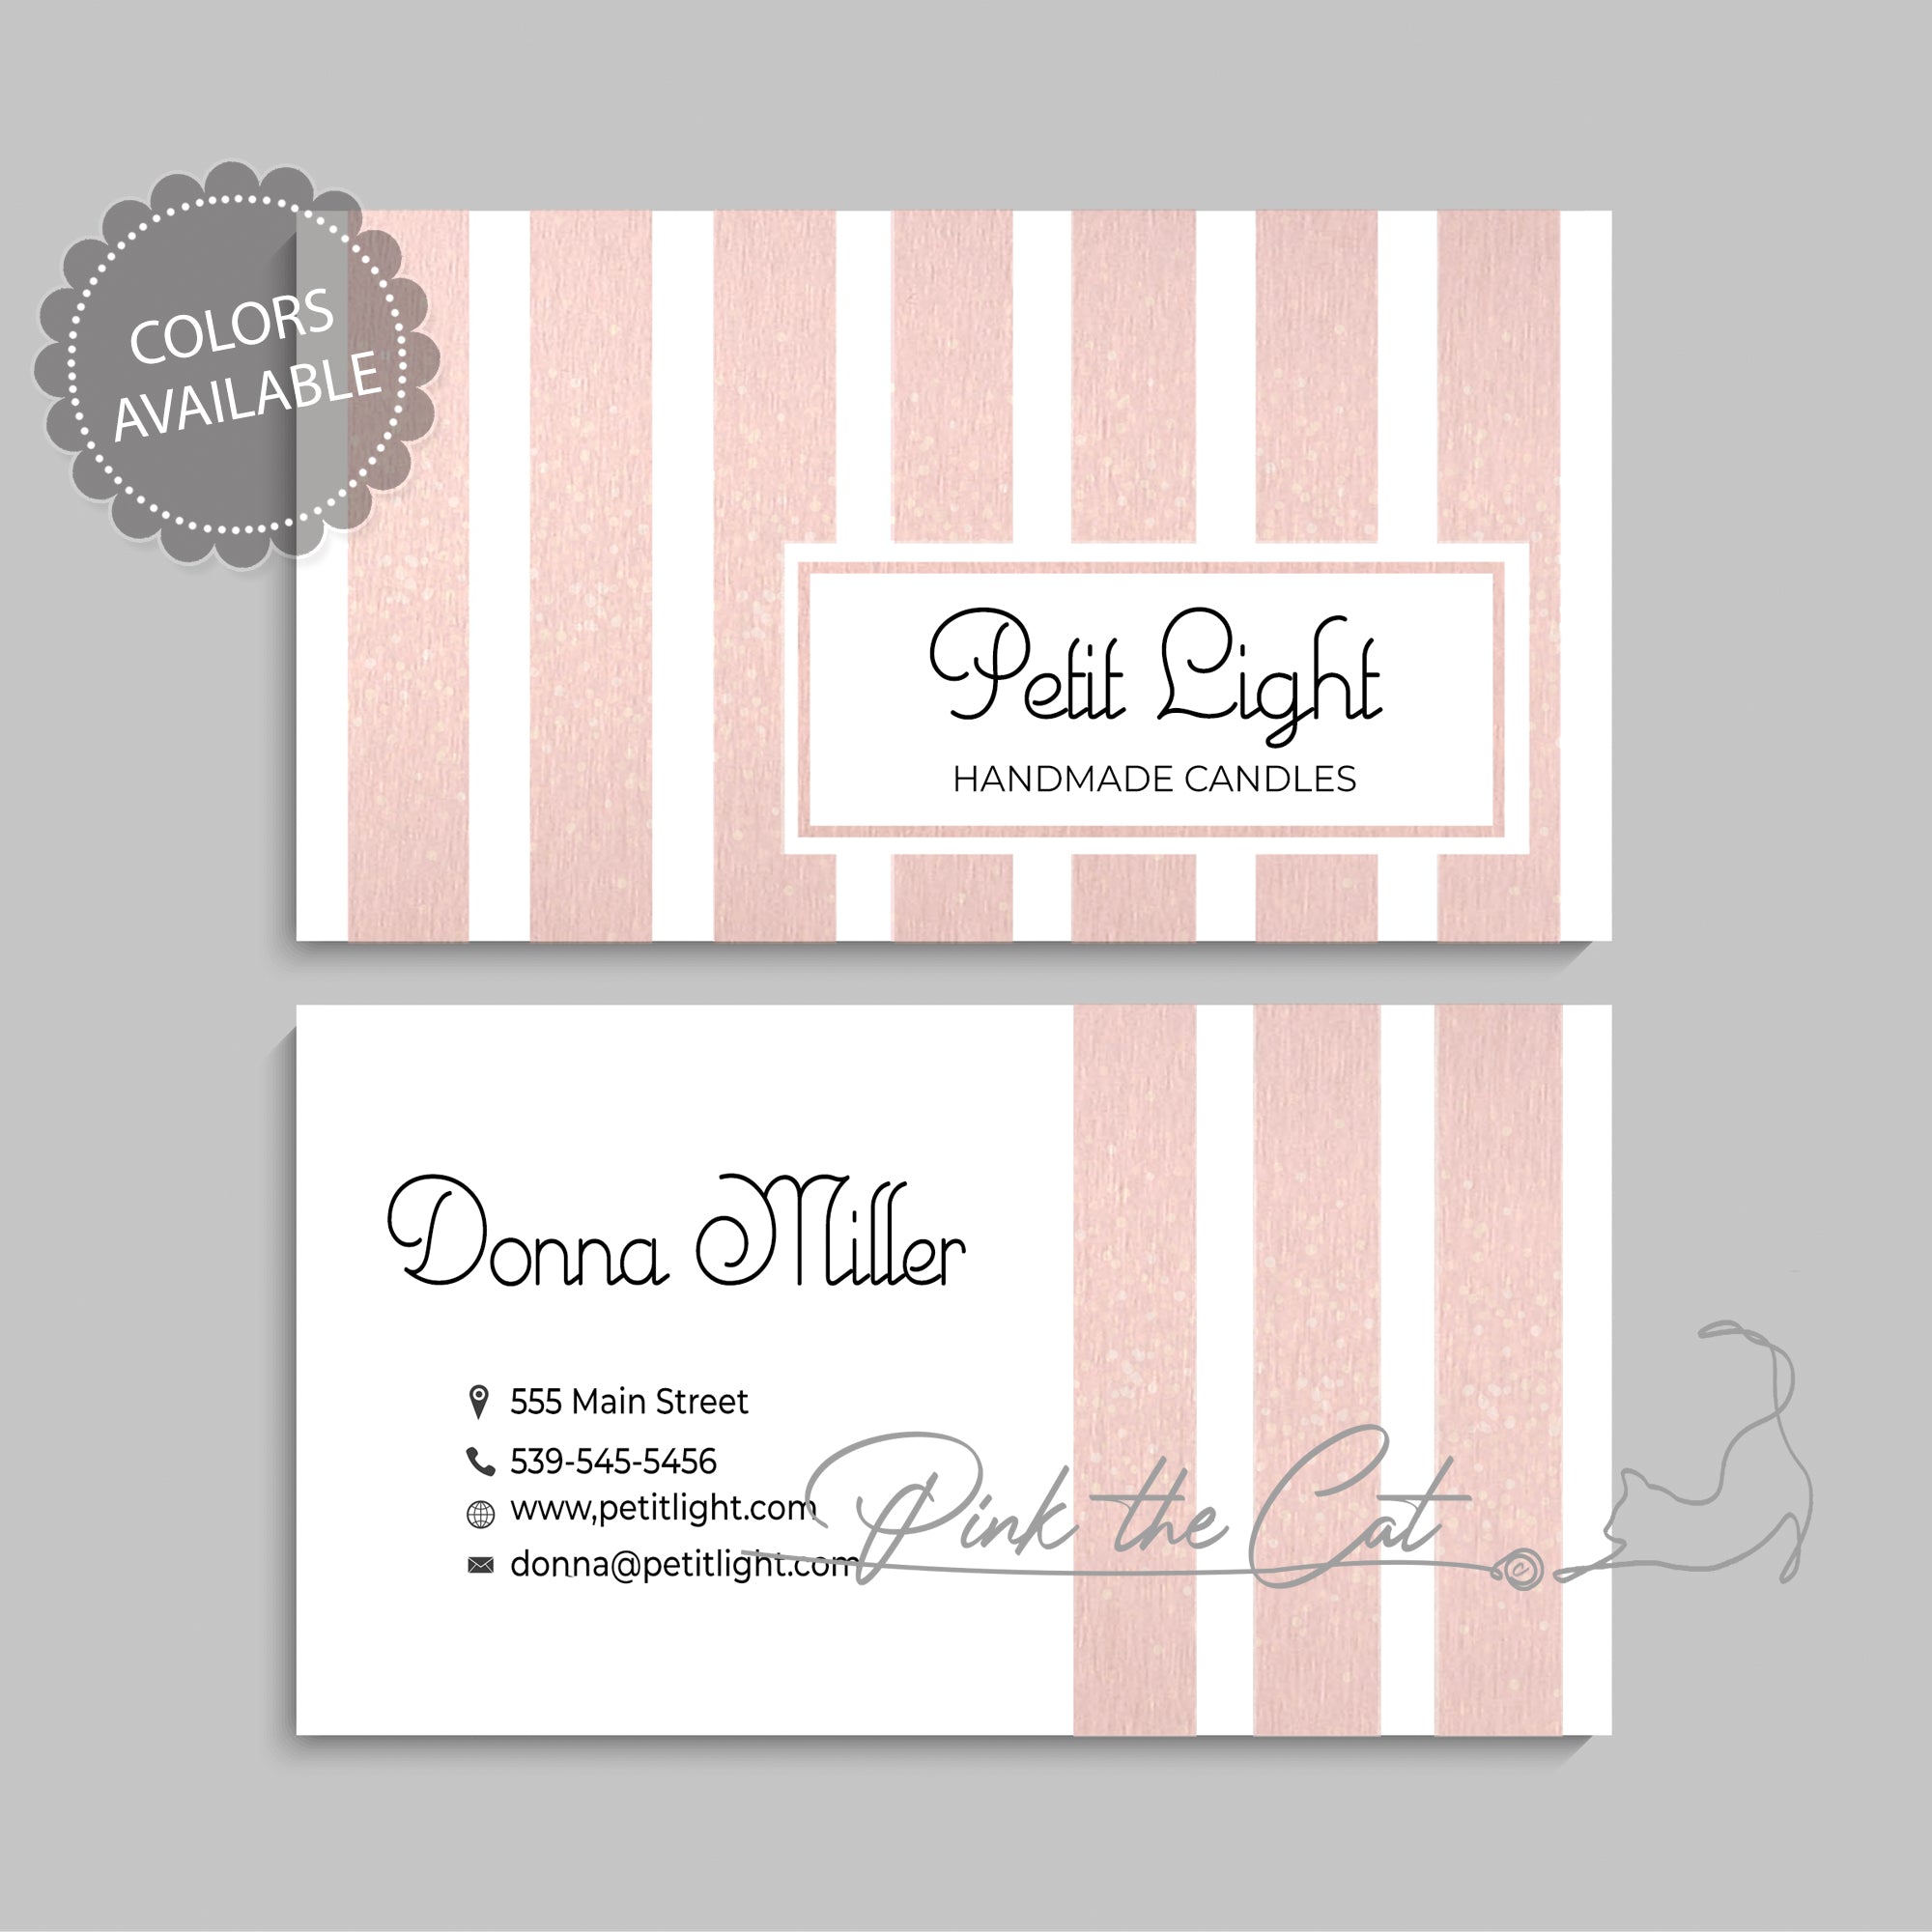 Premade rose gold business card